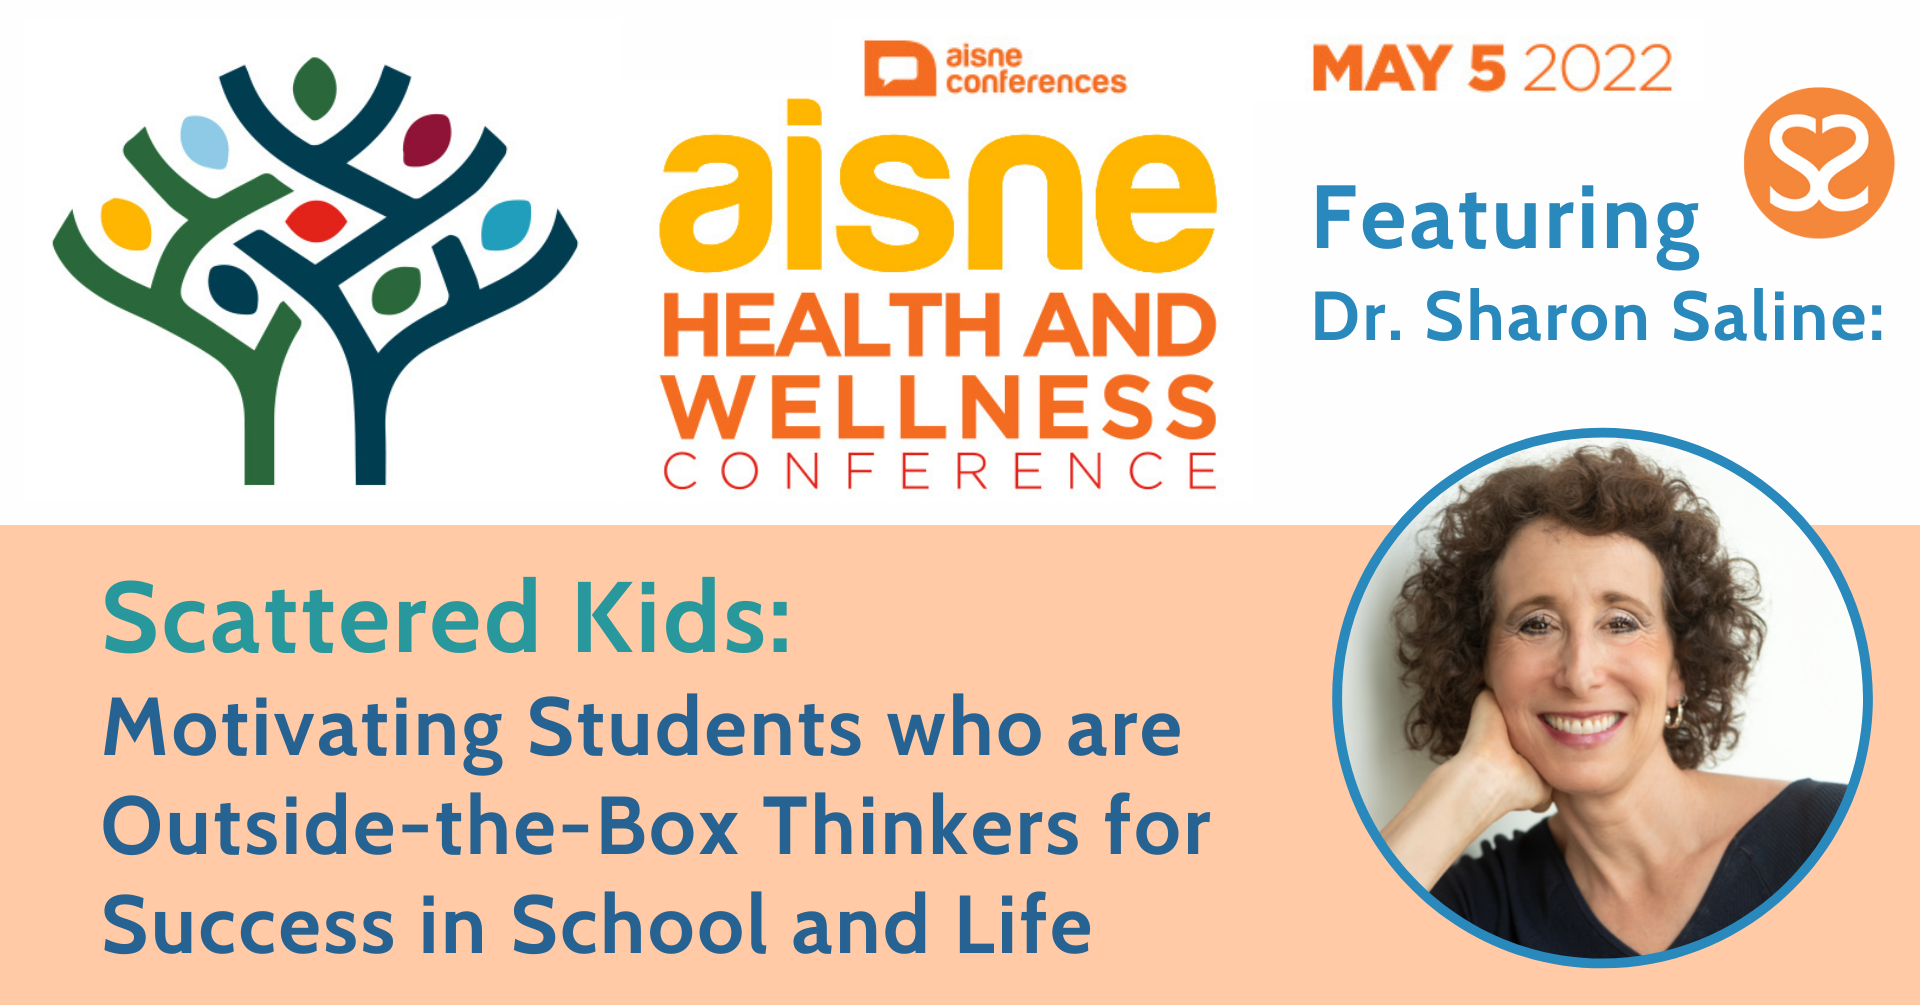 AISNE Health and Wellness Conference featuring Dr. Sharon Saline